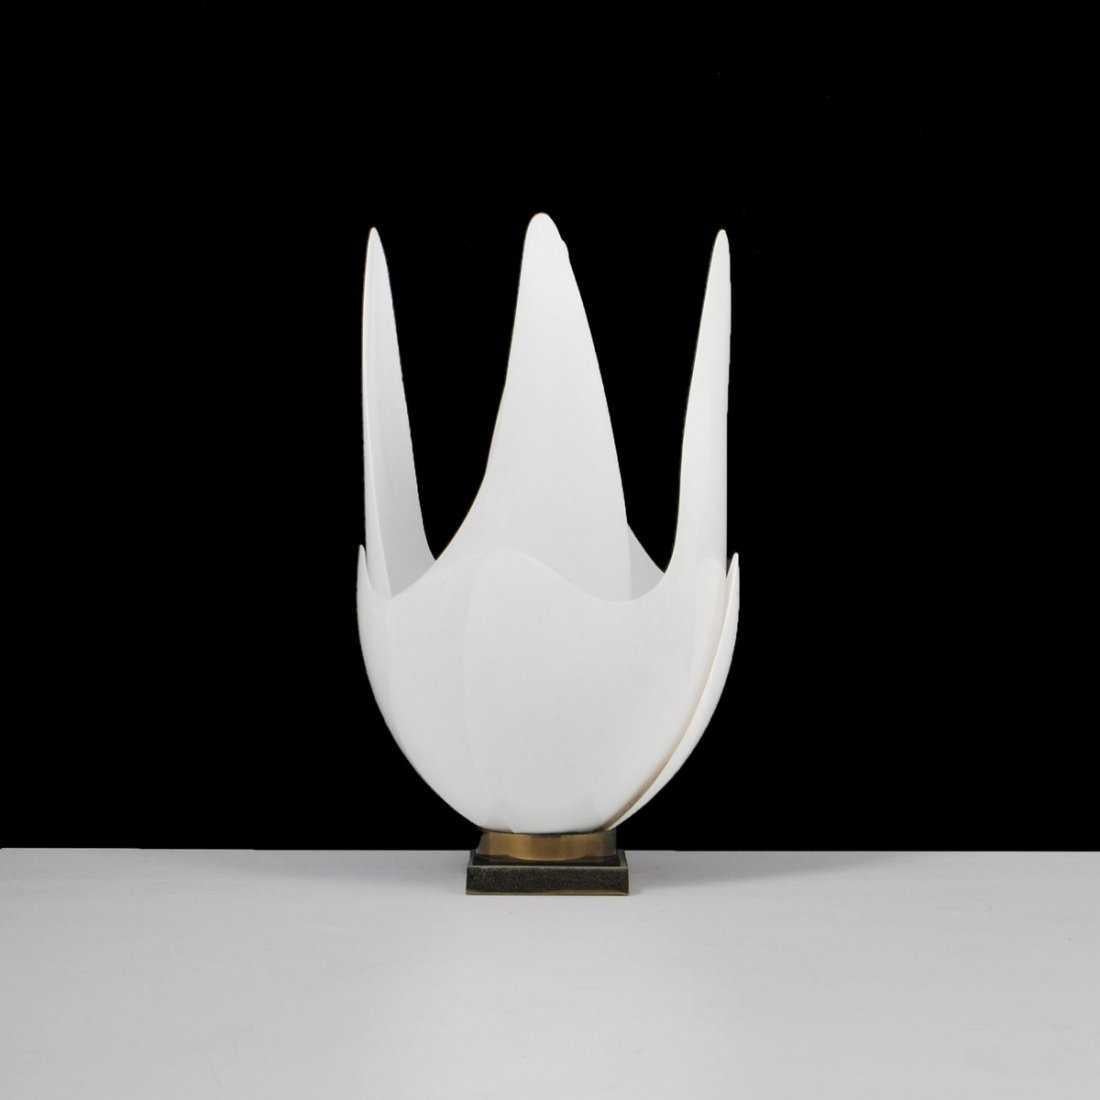 Roger Rougier Rougier was a Canadian company that did many variations of these fine acrylic resin lamps. Made of acrylic resin petals that fit into brass and black Lucite bases. The light illuminates beautifully through the white petals to create a